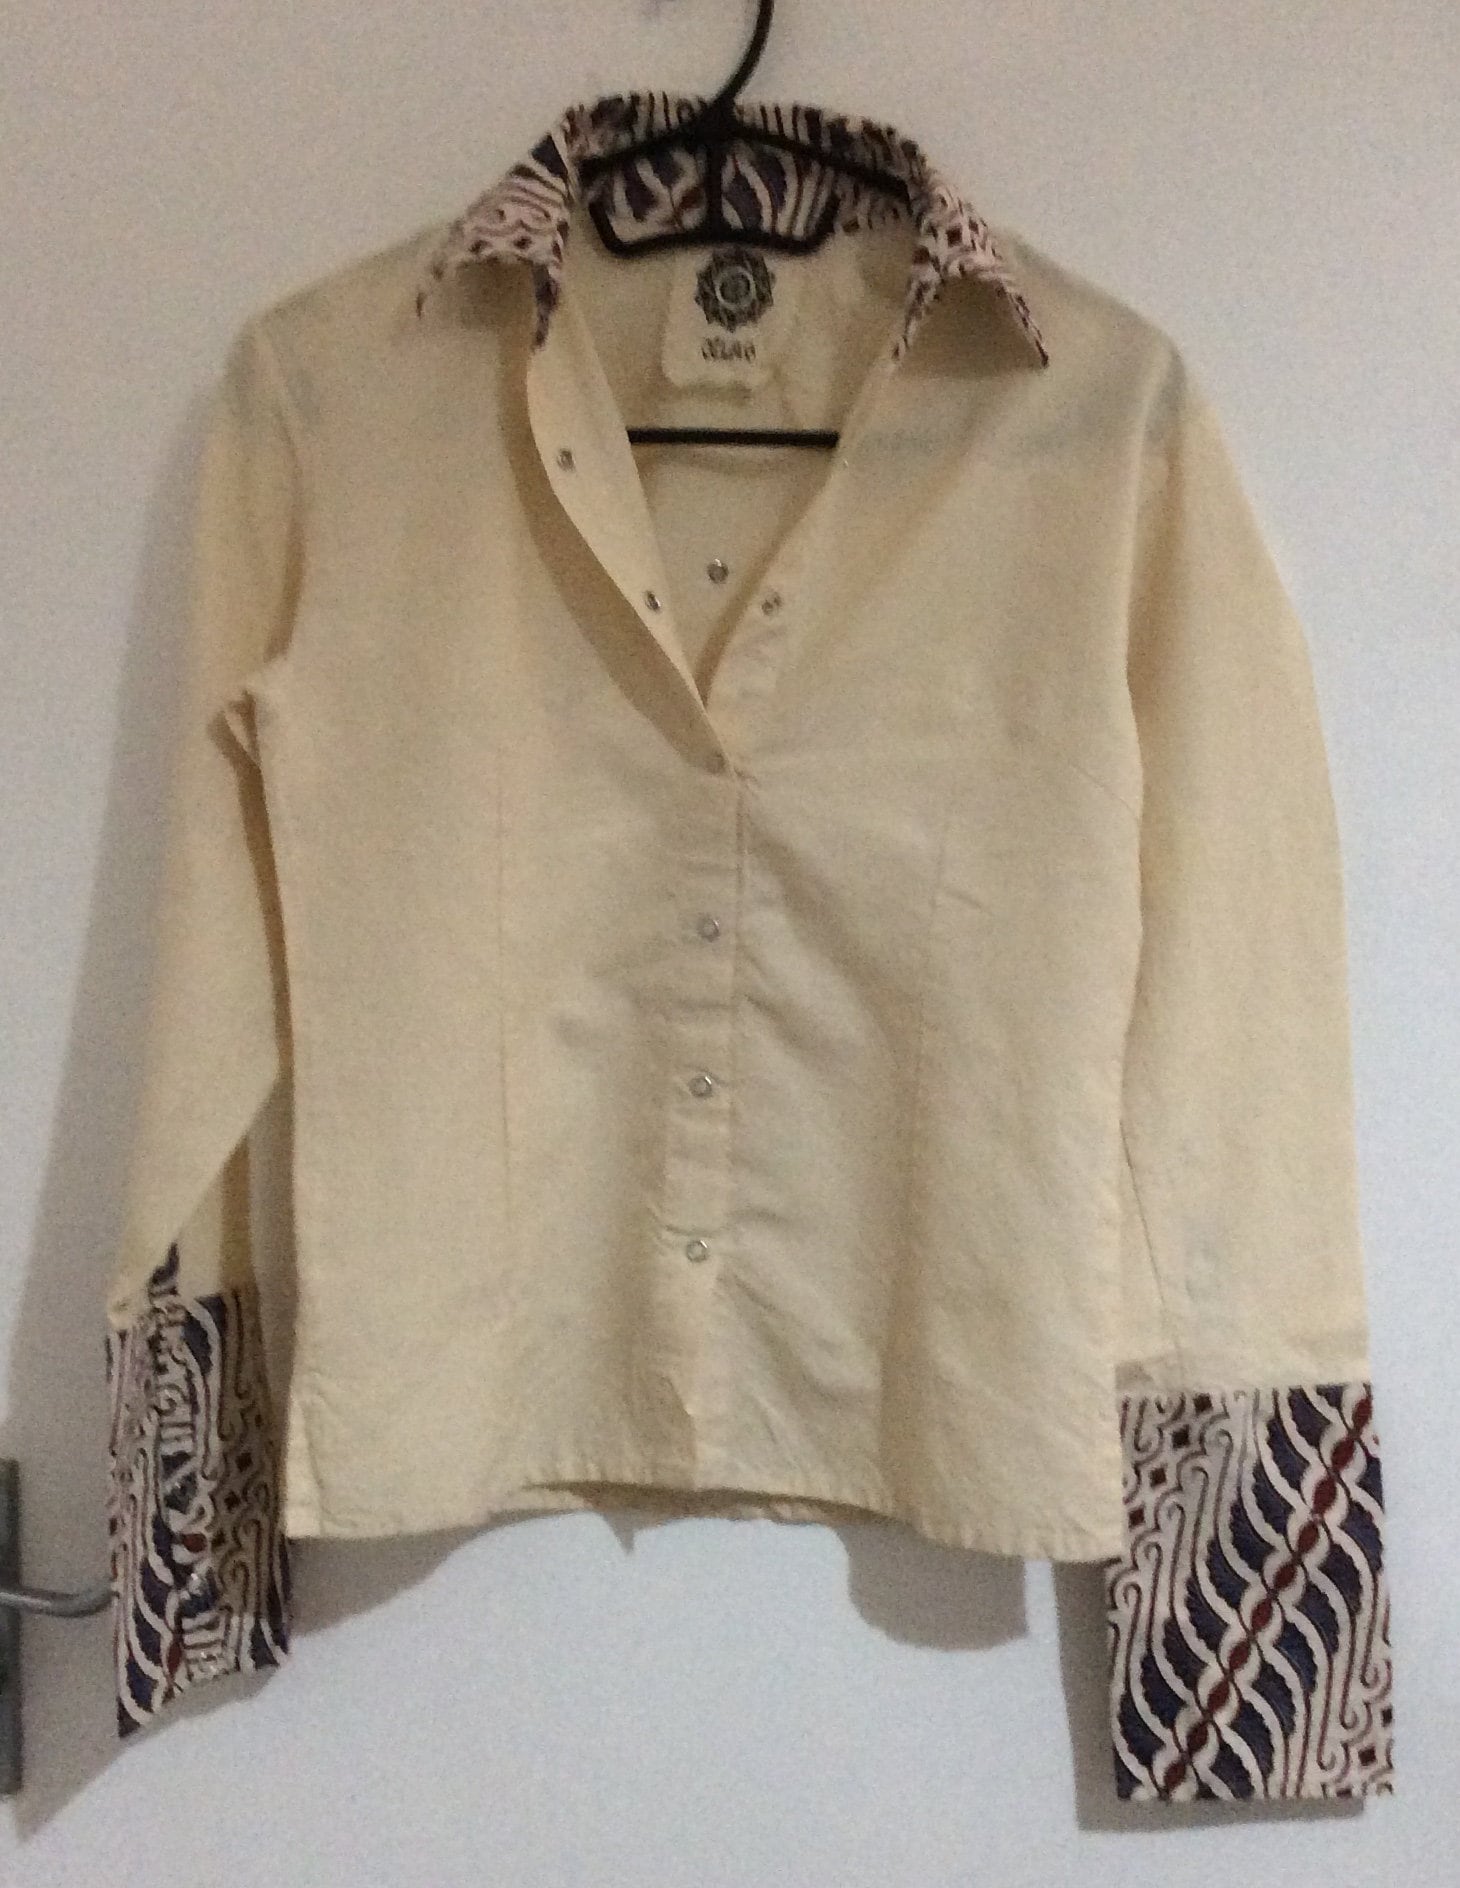 Handwoven Cotton Shirts with Batik Collar/Cuff (Full Snap Button)